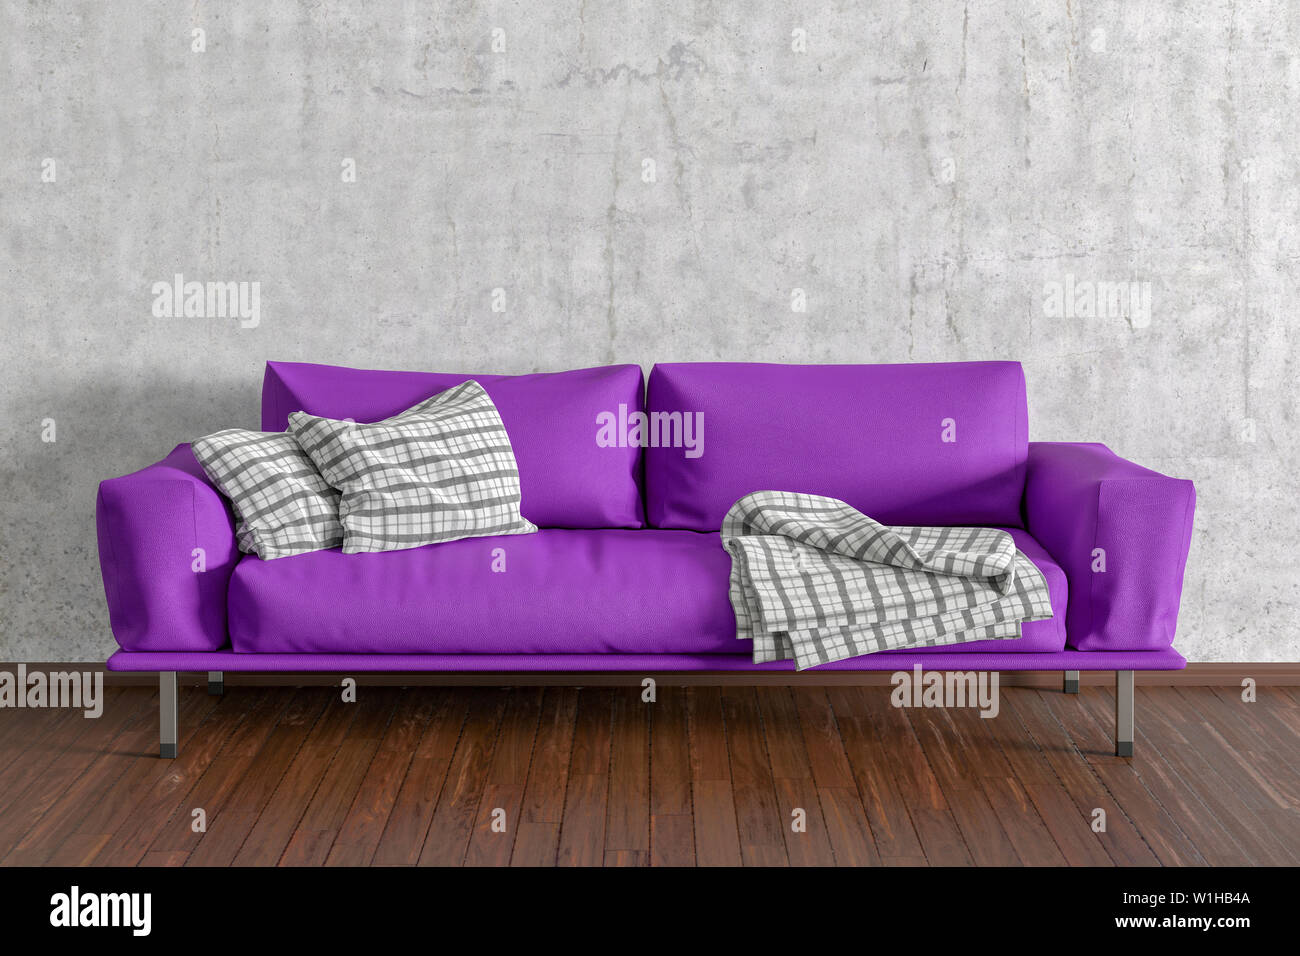 Fuchsia leather couch in interior of living room with wooden flooring and concrete wall. 3d illustration Stock Photo